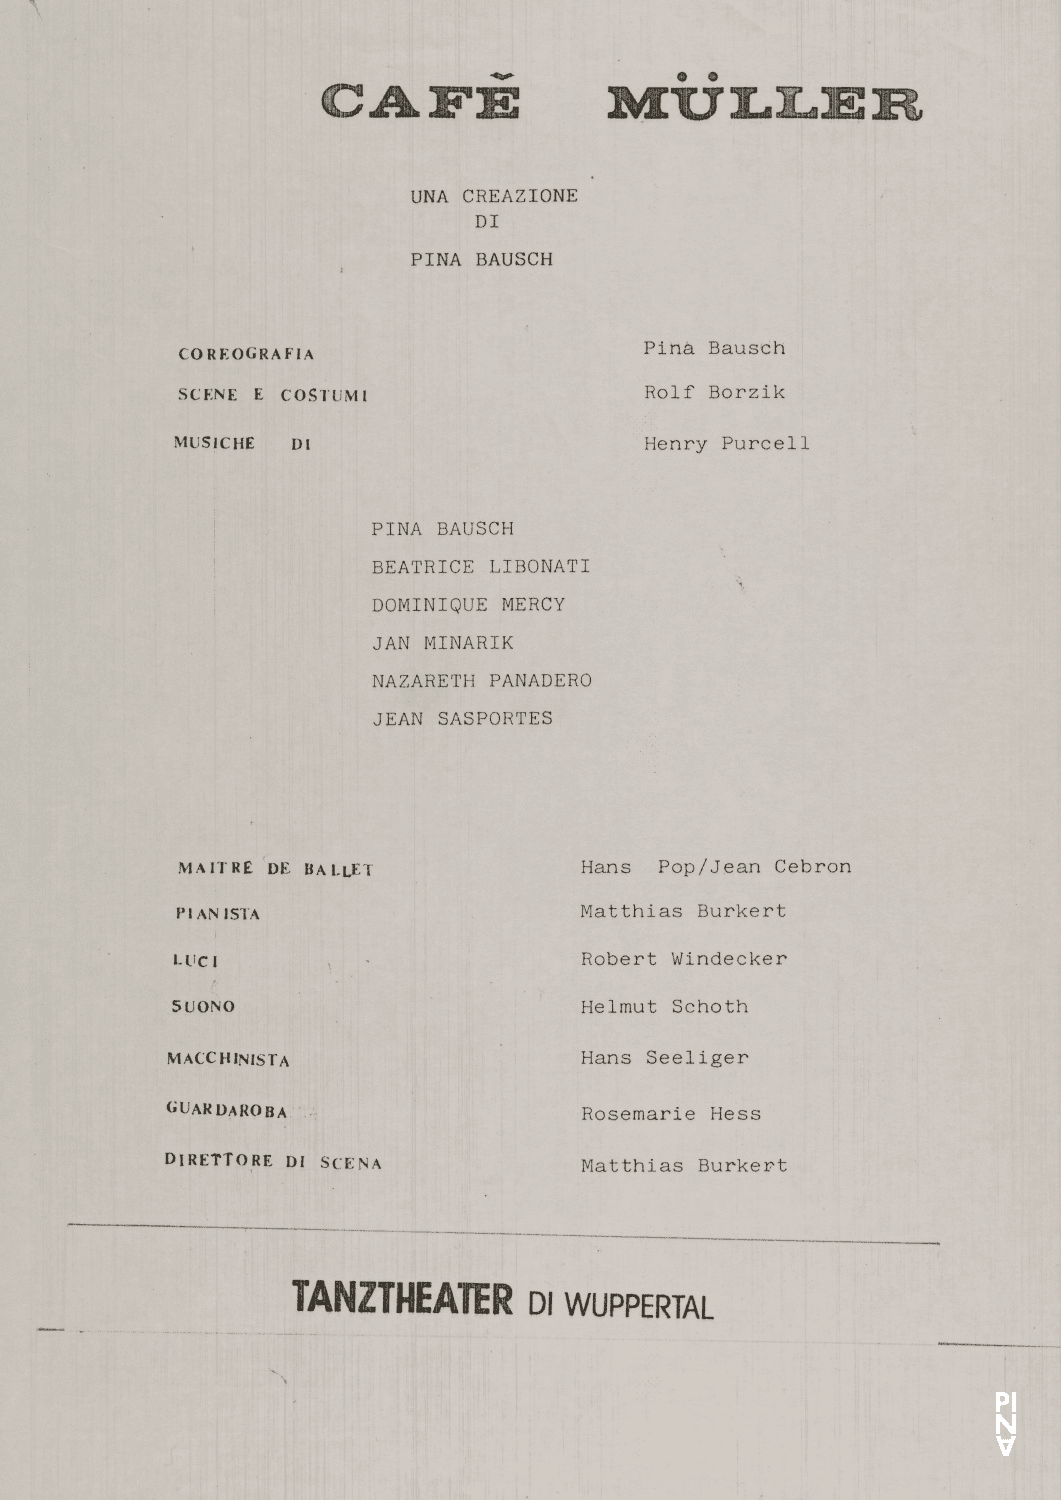 Evening leaflet for “Café Müller” by Pina Bausch with Tanztheater Wuppertal in in Sassari, 02/22/1984 – 02/23/1984